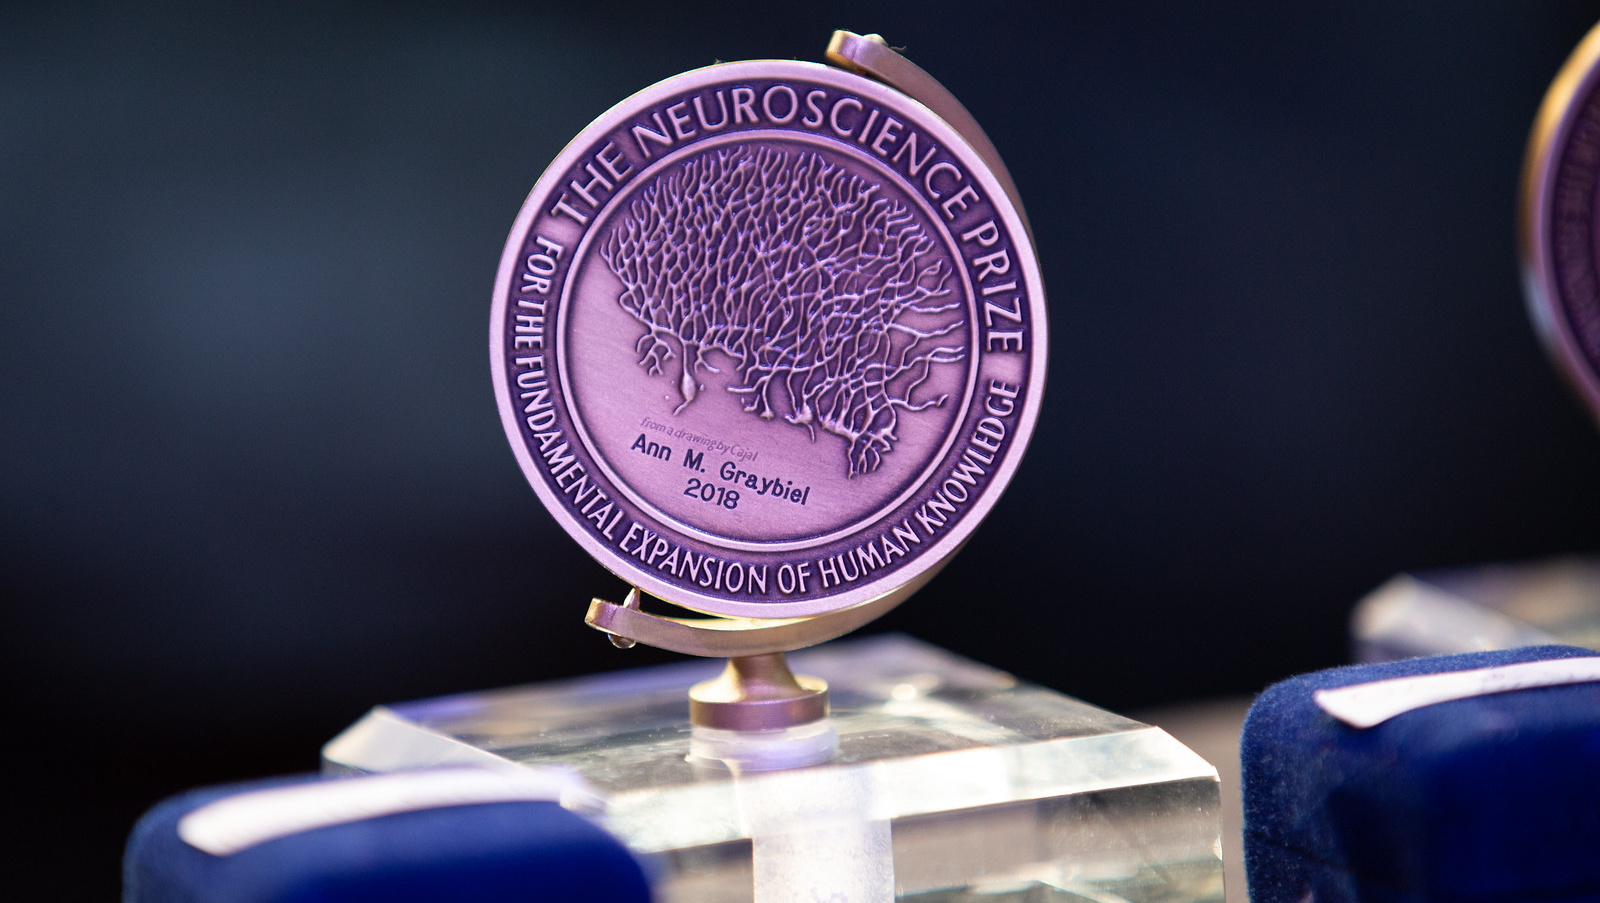 Ann M. Graybiel's the Neuroscience Prize for the Fundamental Expansion of Human Knowledge award